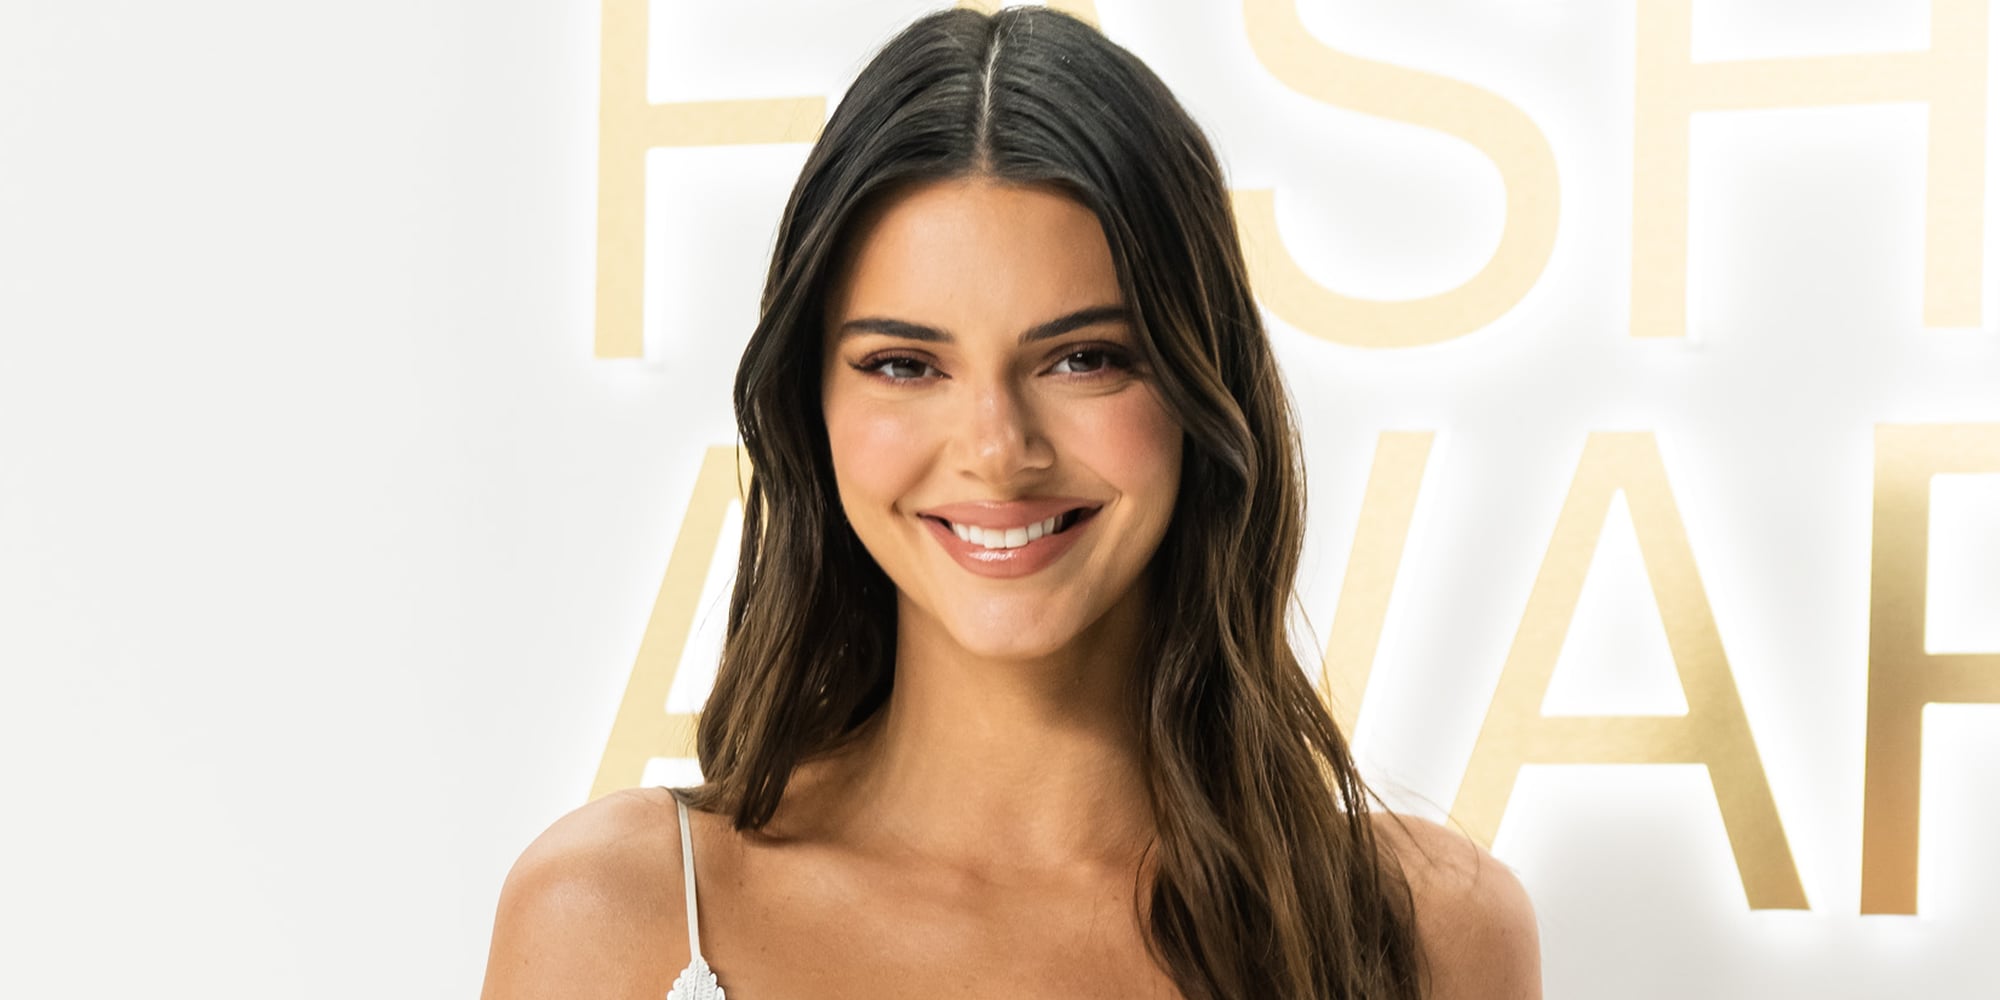 Kendall Jenner Has A New Job As A Chatbot